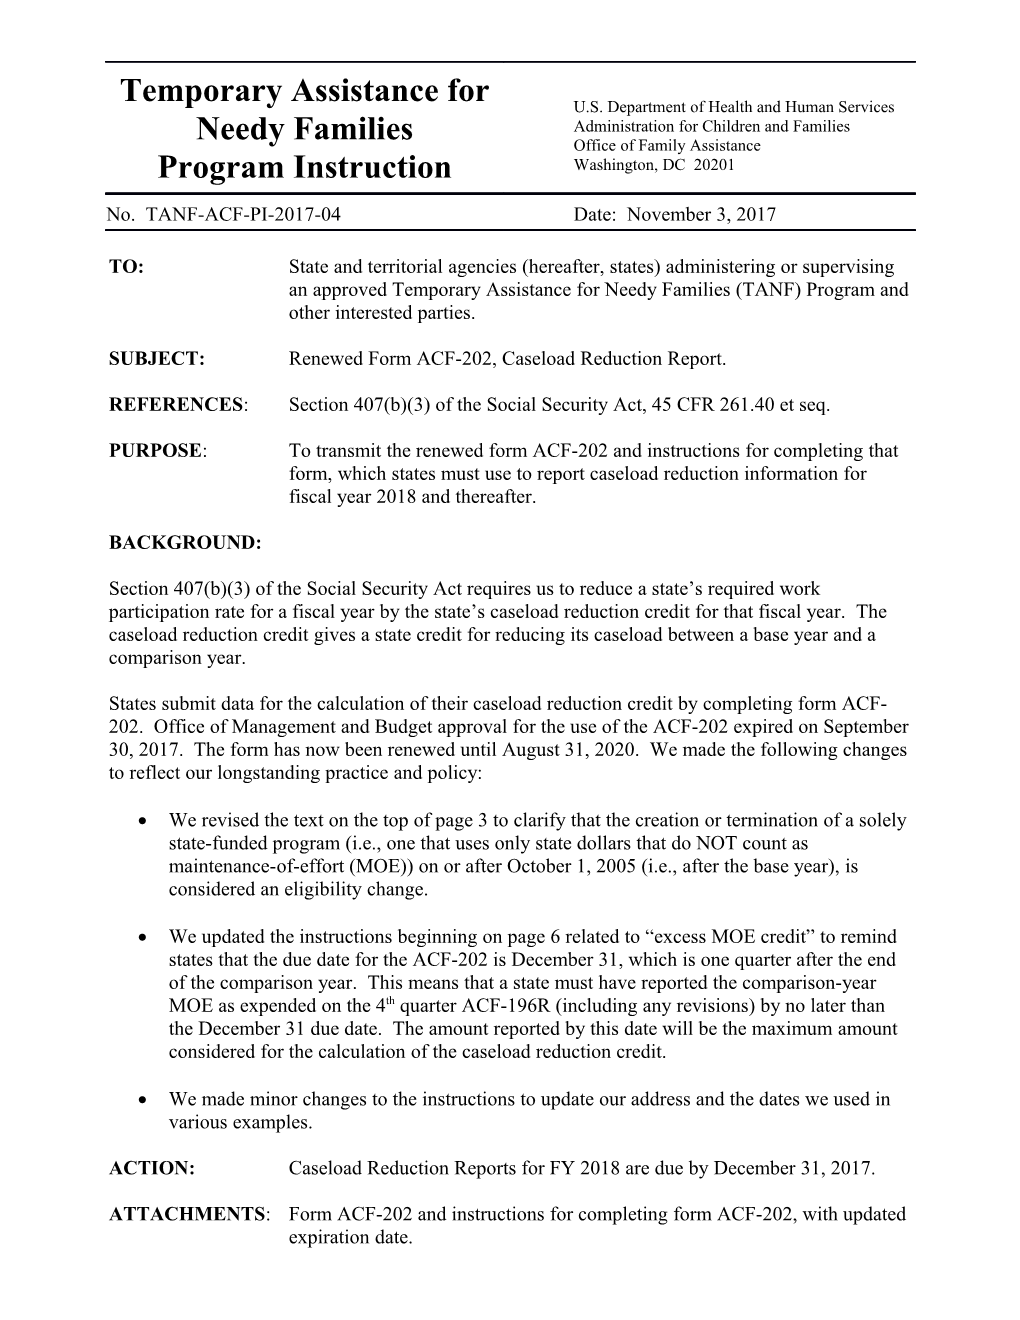 SUBJECT:Renewed Form ACF-202, Caseload Reduction Report